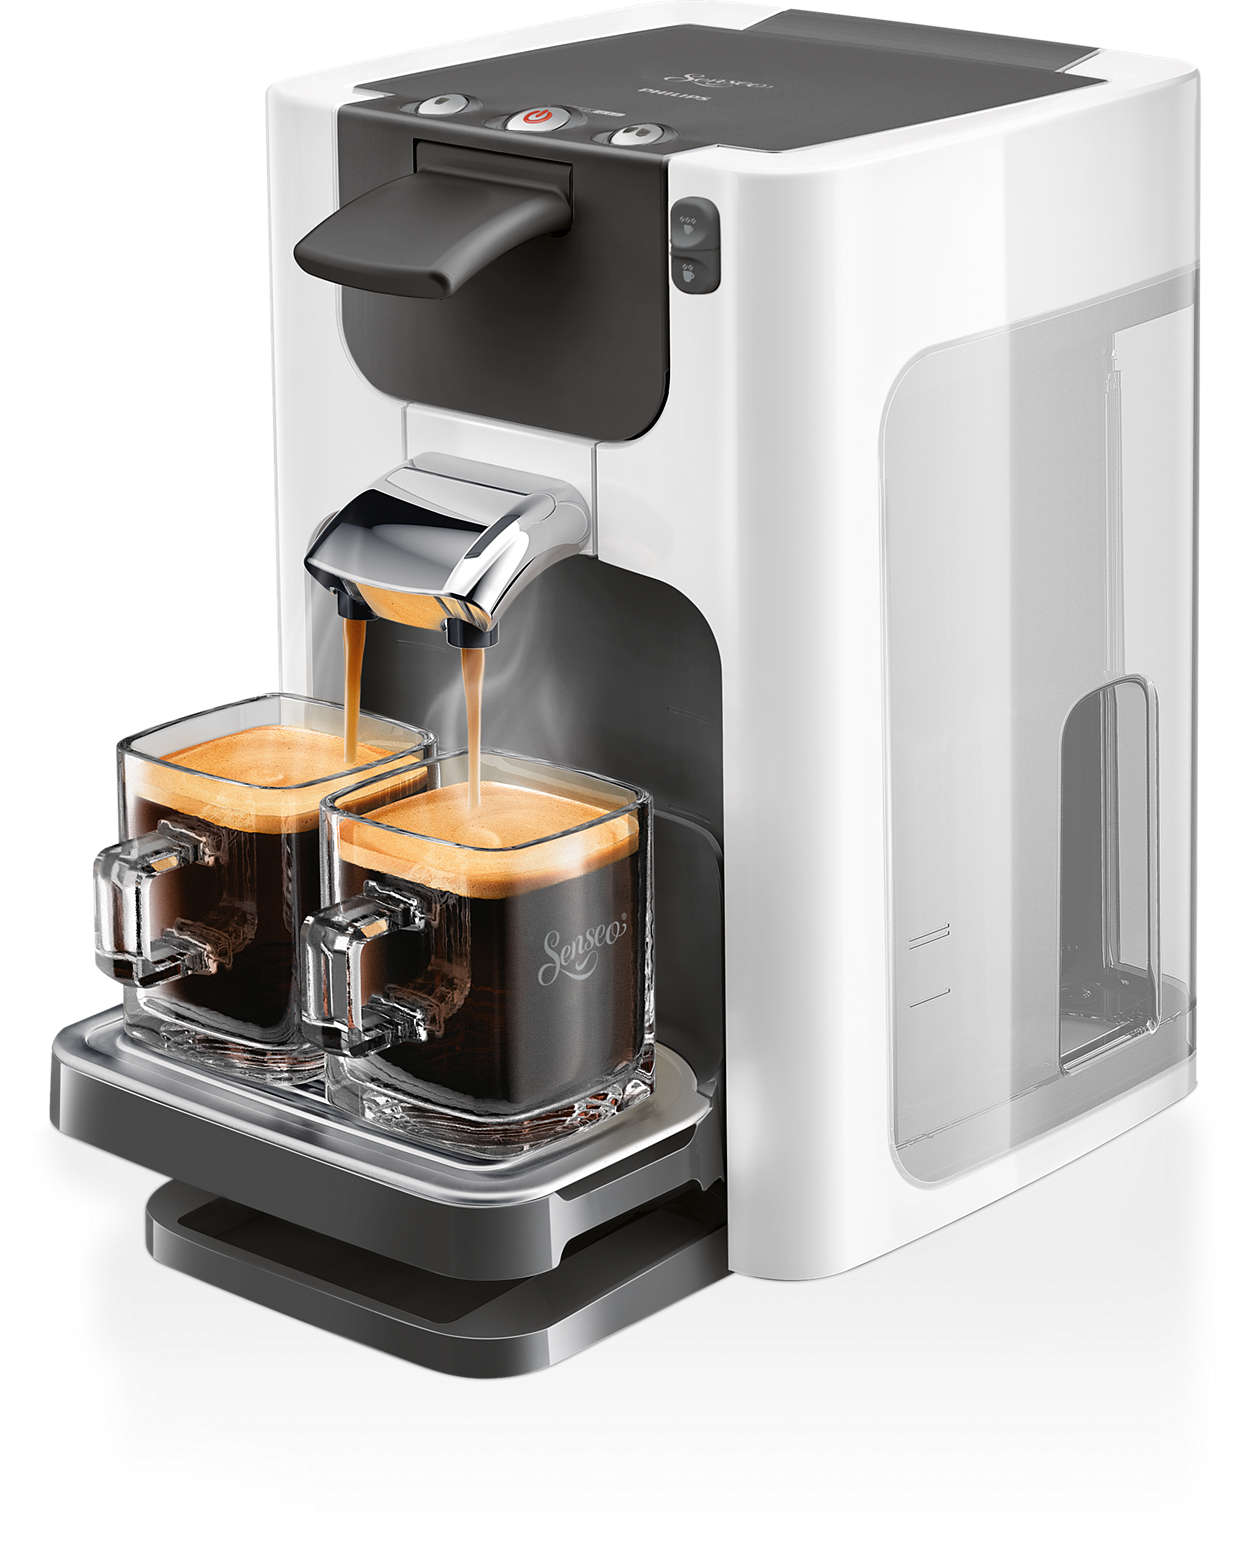 Delicious coffee at a touch, in a modern design